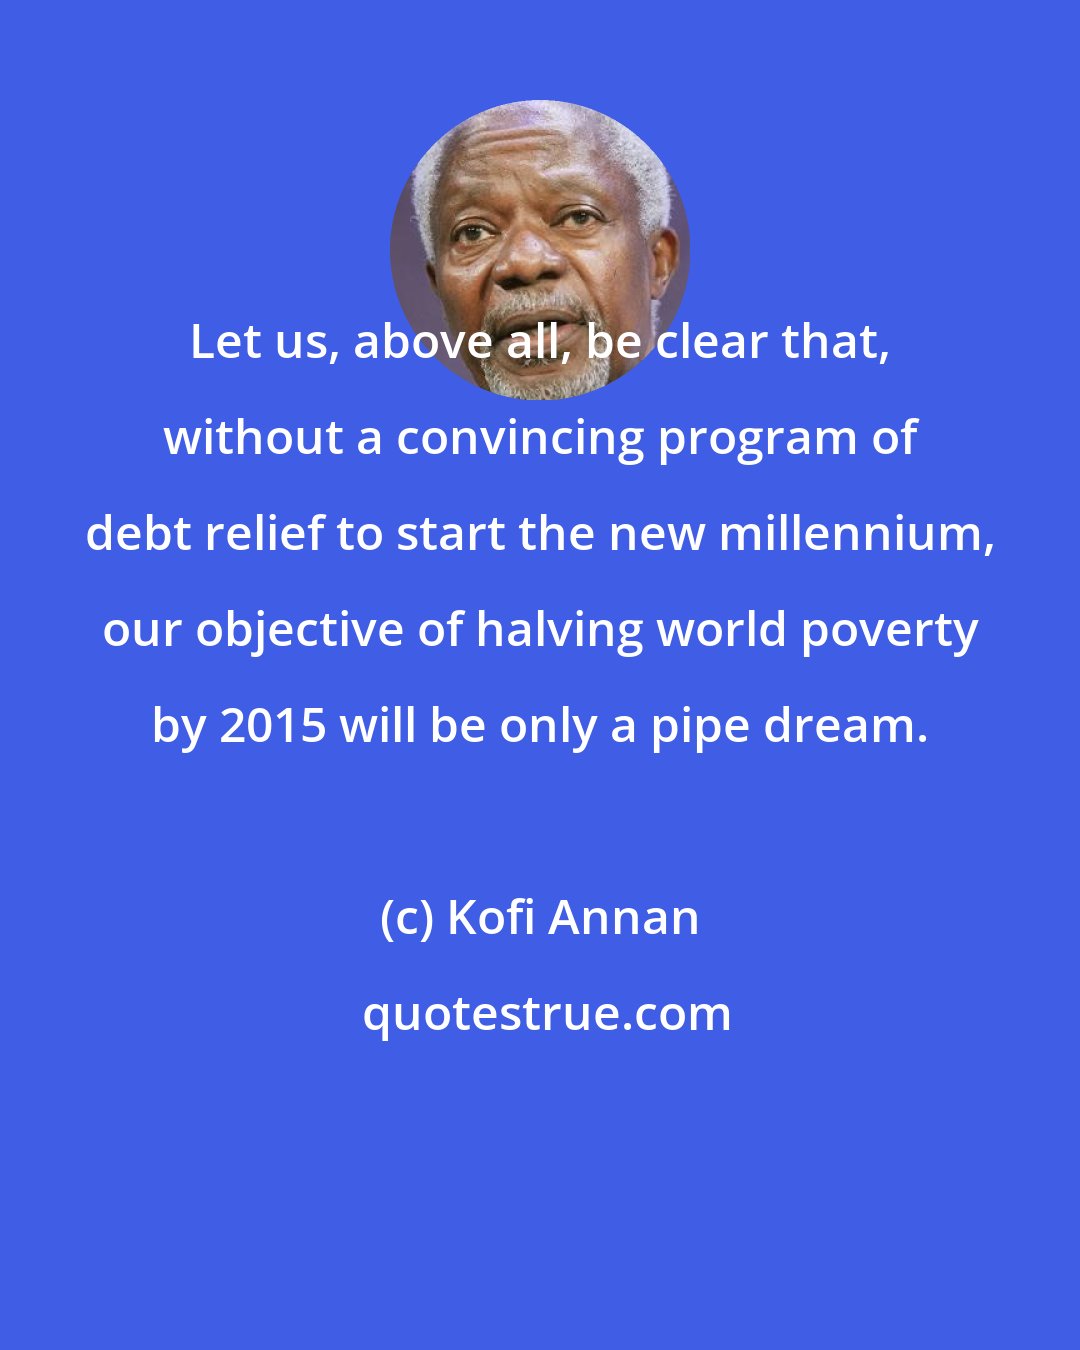 Kofi Annan: Let us, above all, be clear that, without a convincing program of debt relief to start the new millennium, our objective of halving world poverty by 2015 will be only a pipe dream.